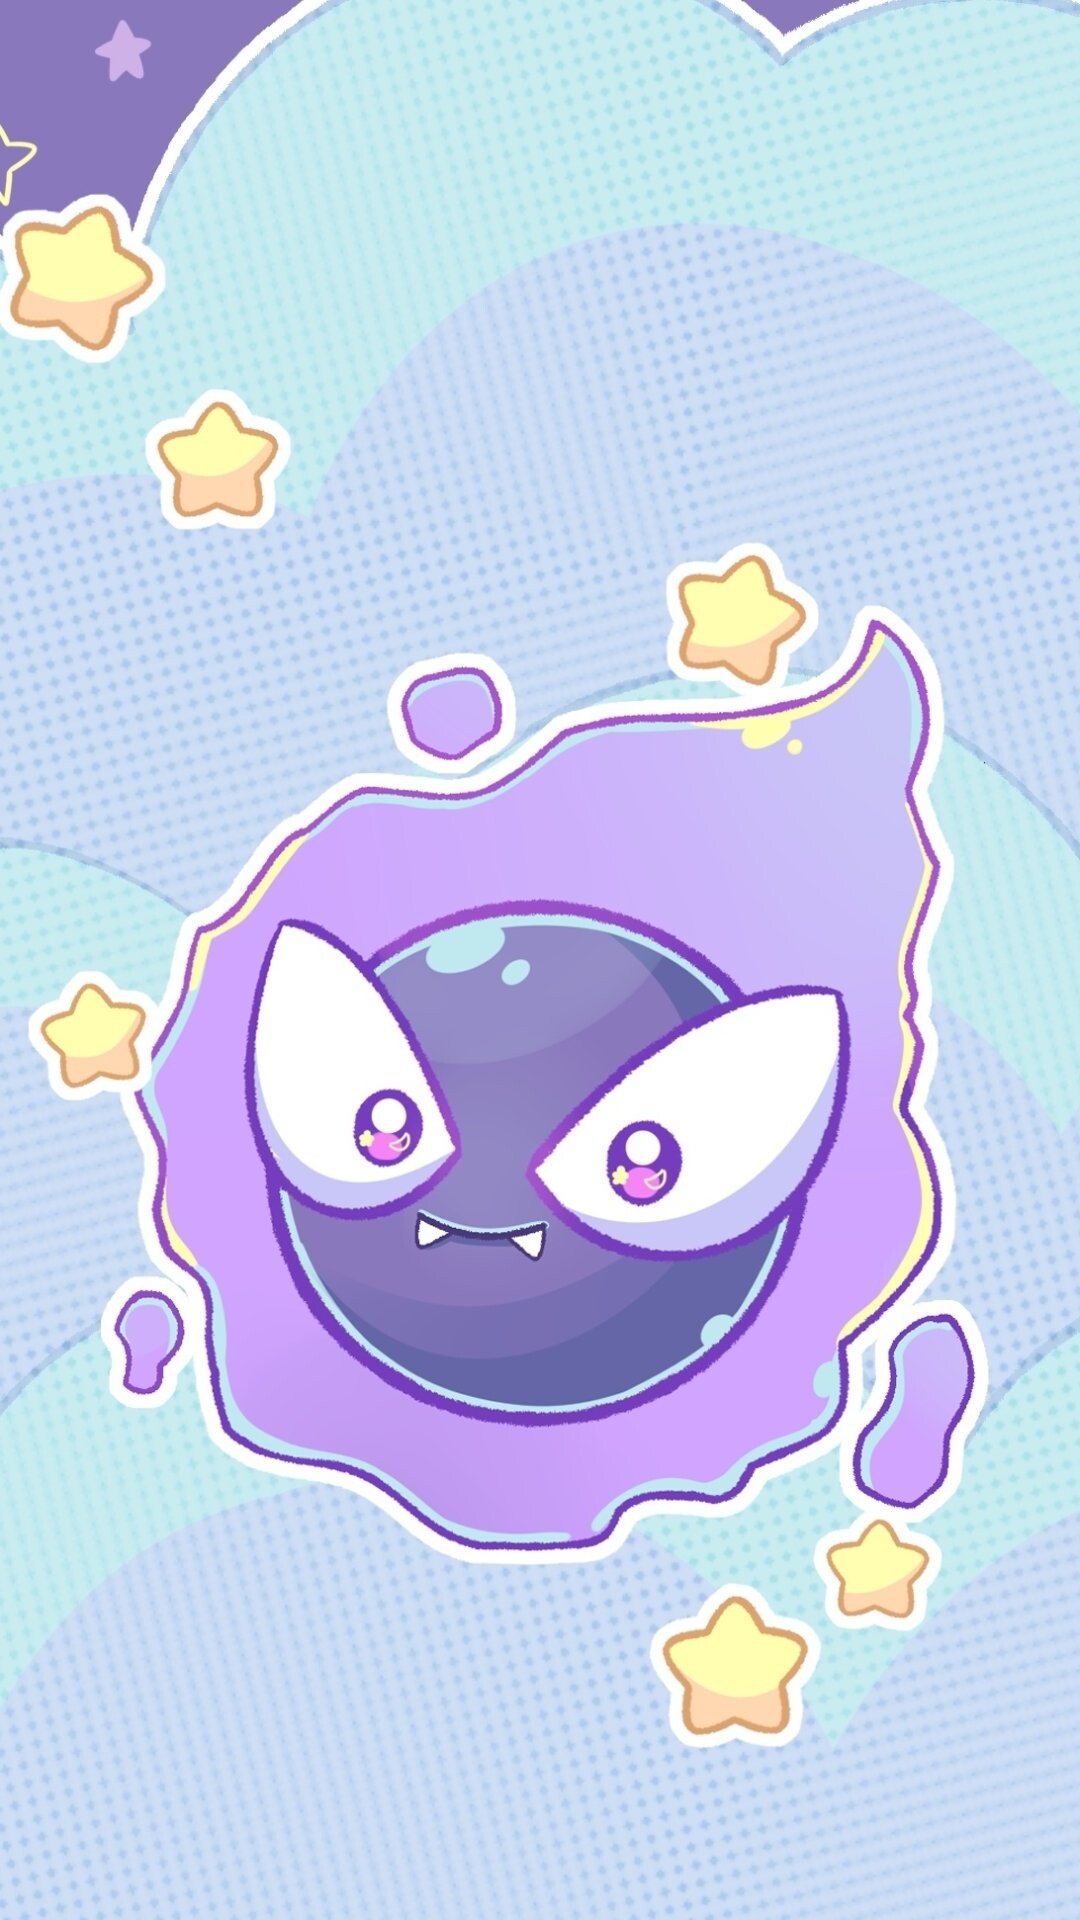 Ghost Pokemon: Gastly, has no real shape as it appears to be made of a gas. 1080x1920 Full HD Background.